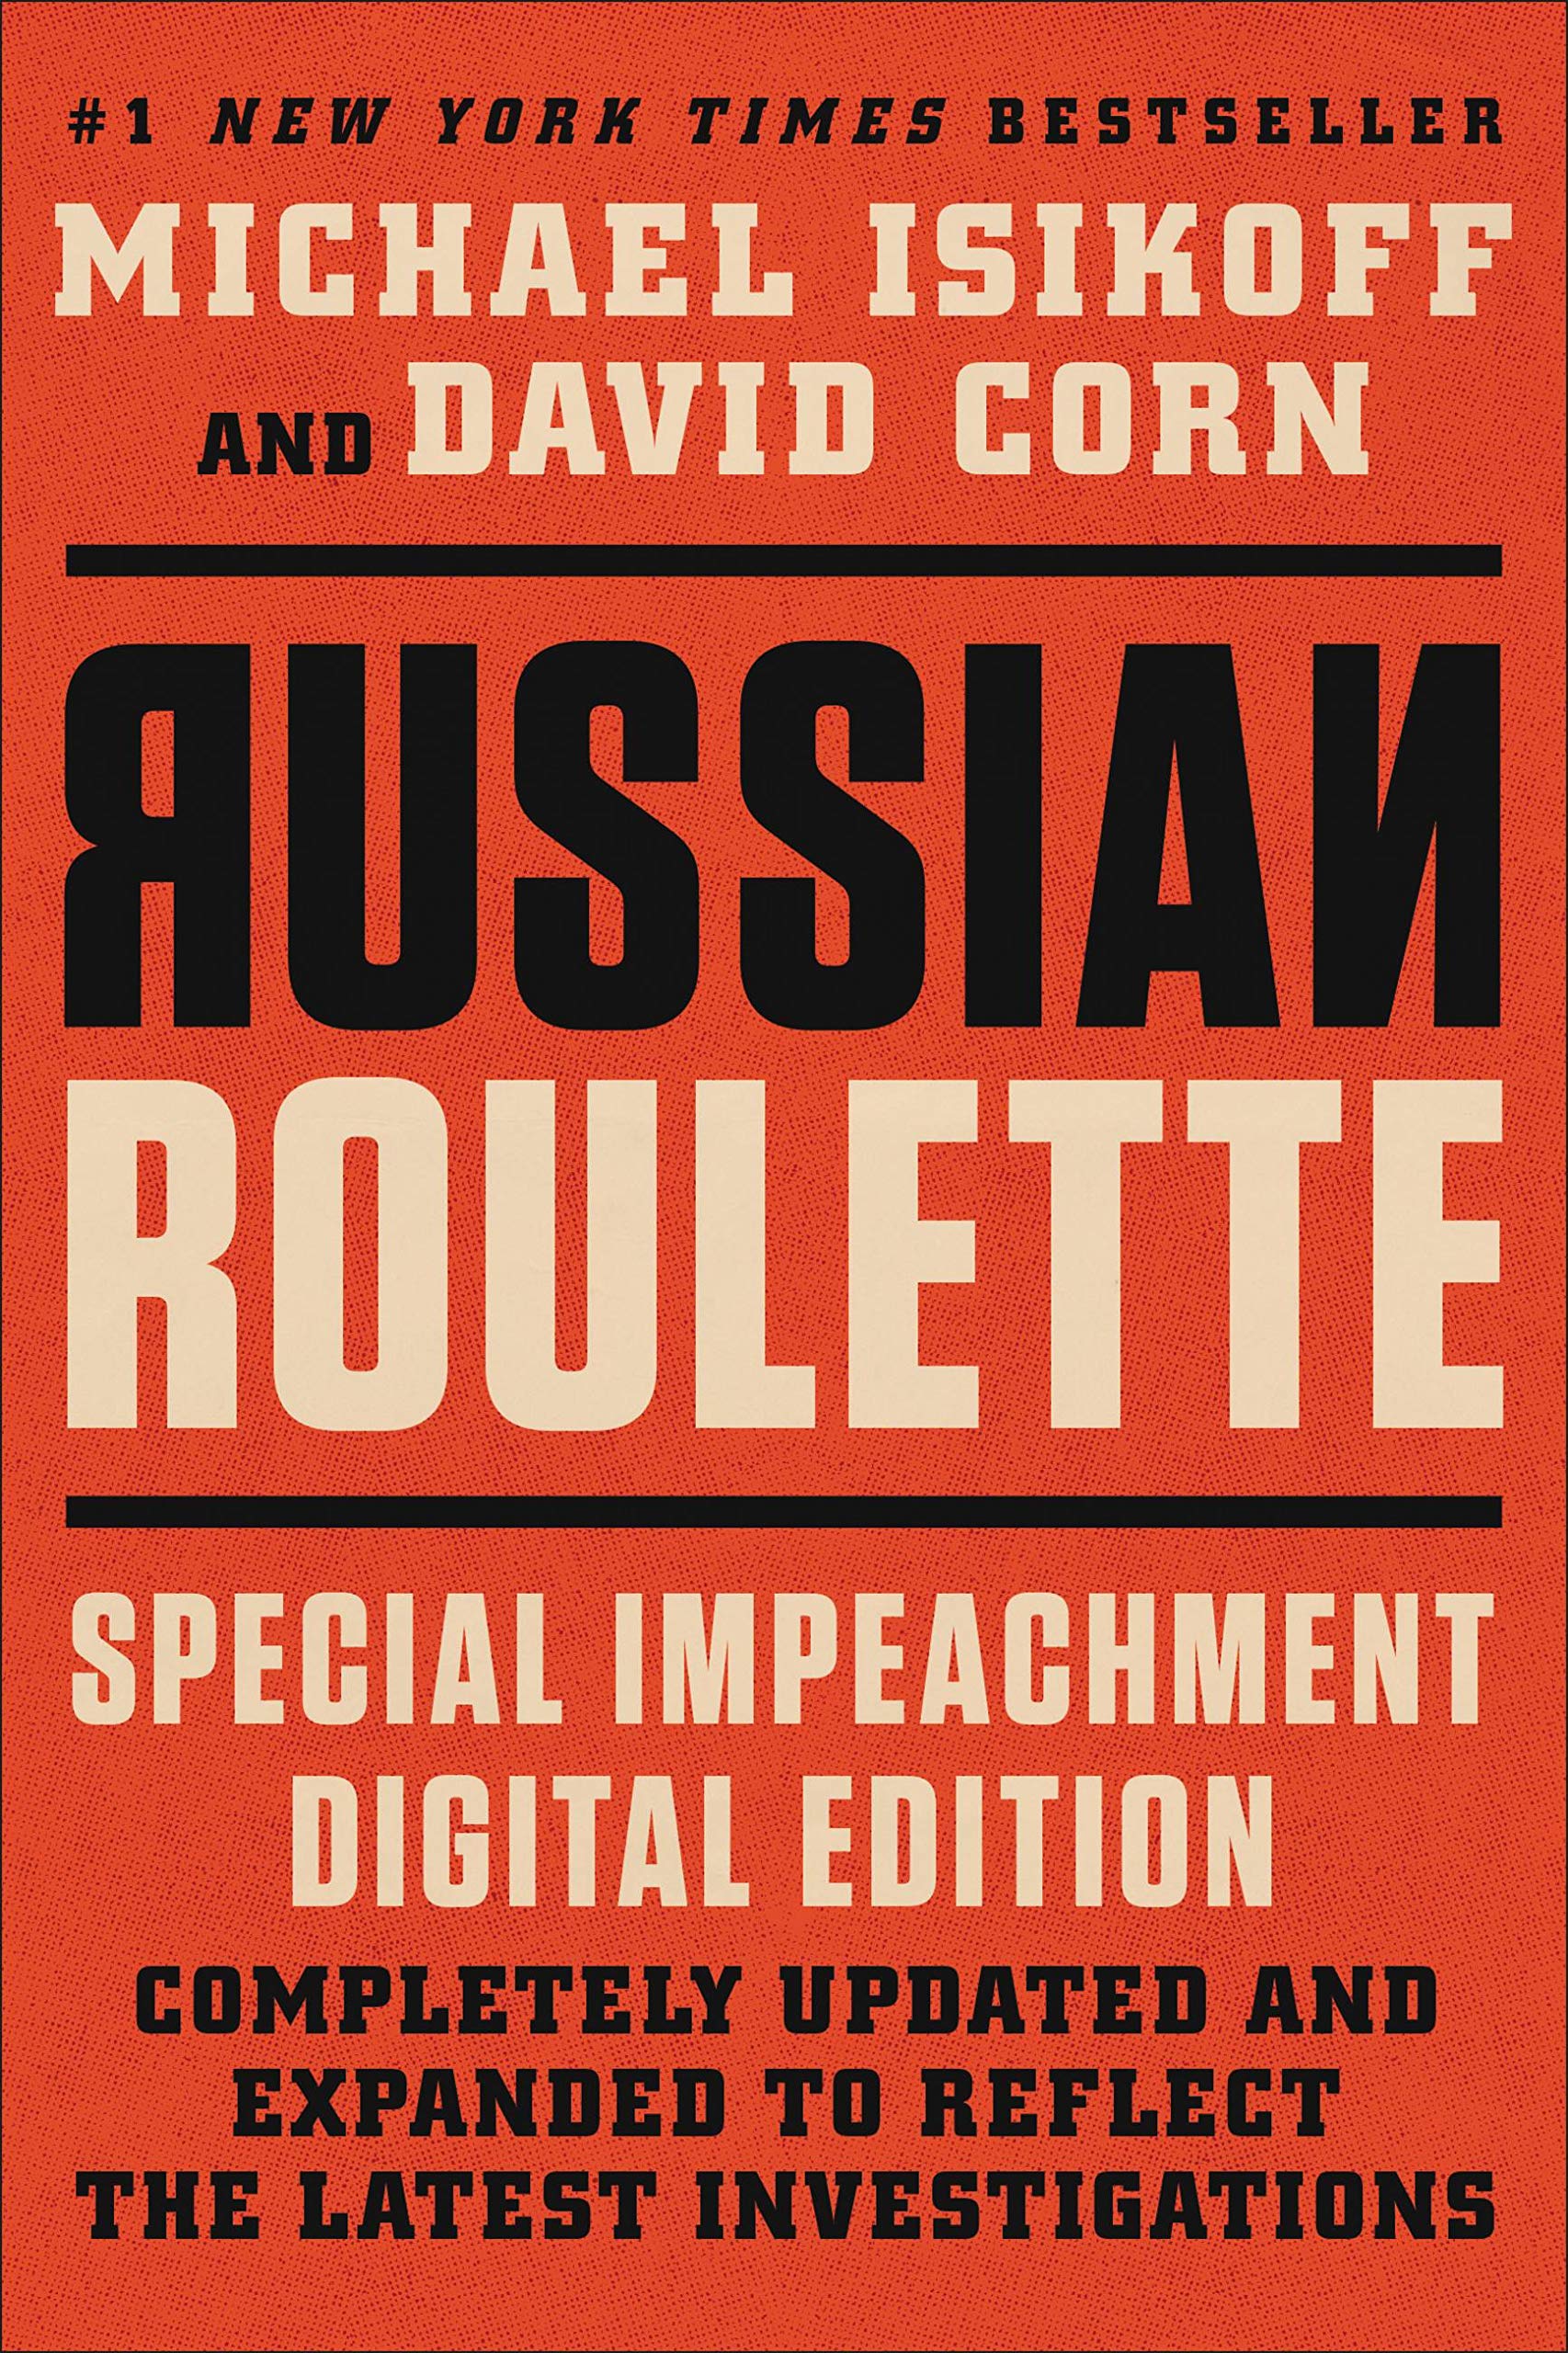 Russian Roulette: The Inside Story of Putin's War on America and the Election of Donald Trump (eBook) by Michael Isikoff, David Corn $2.99